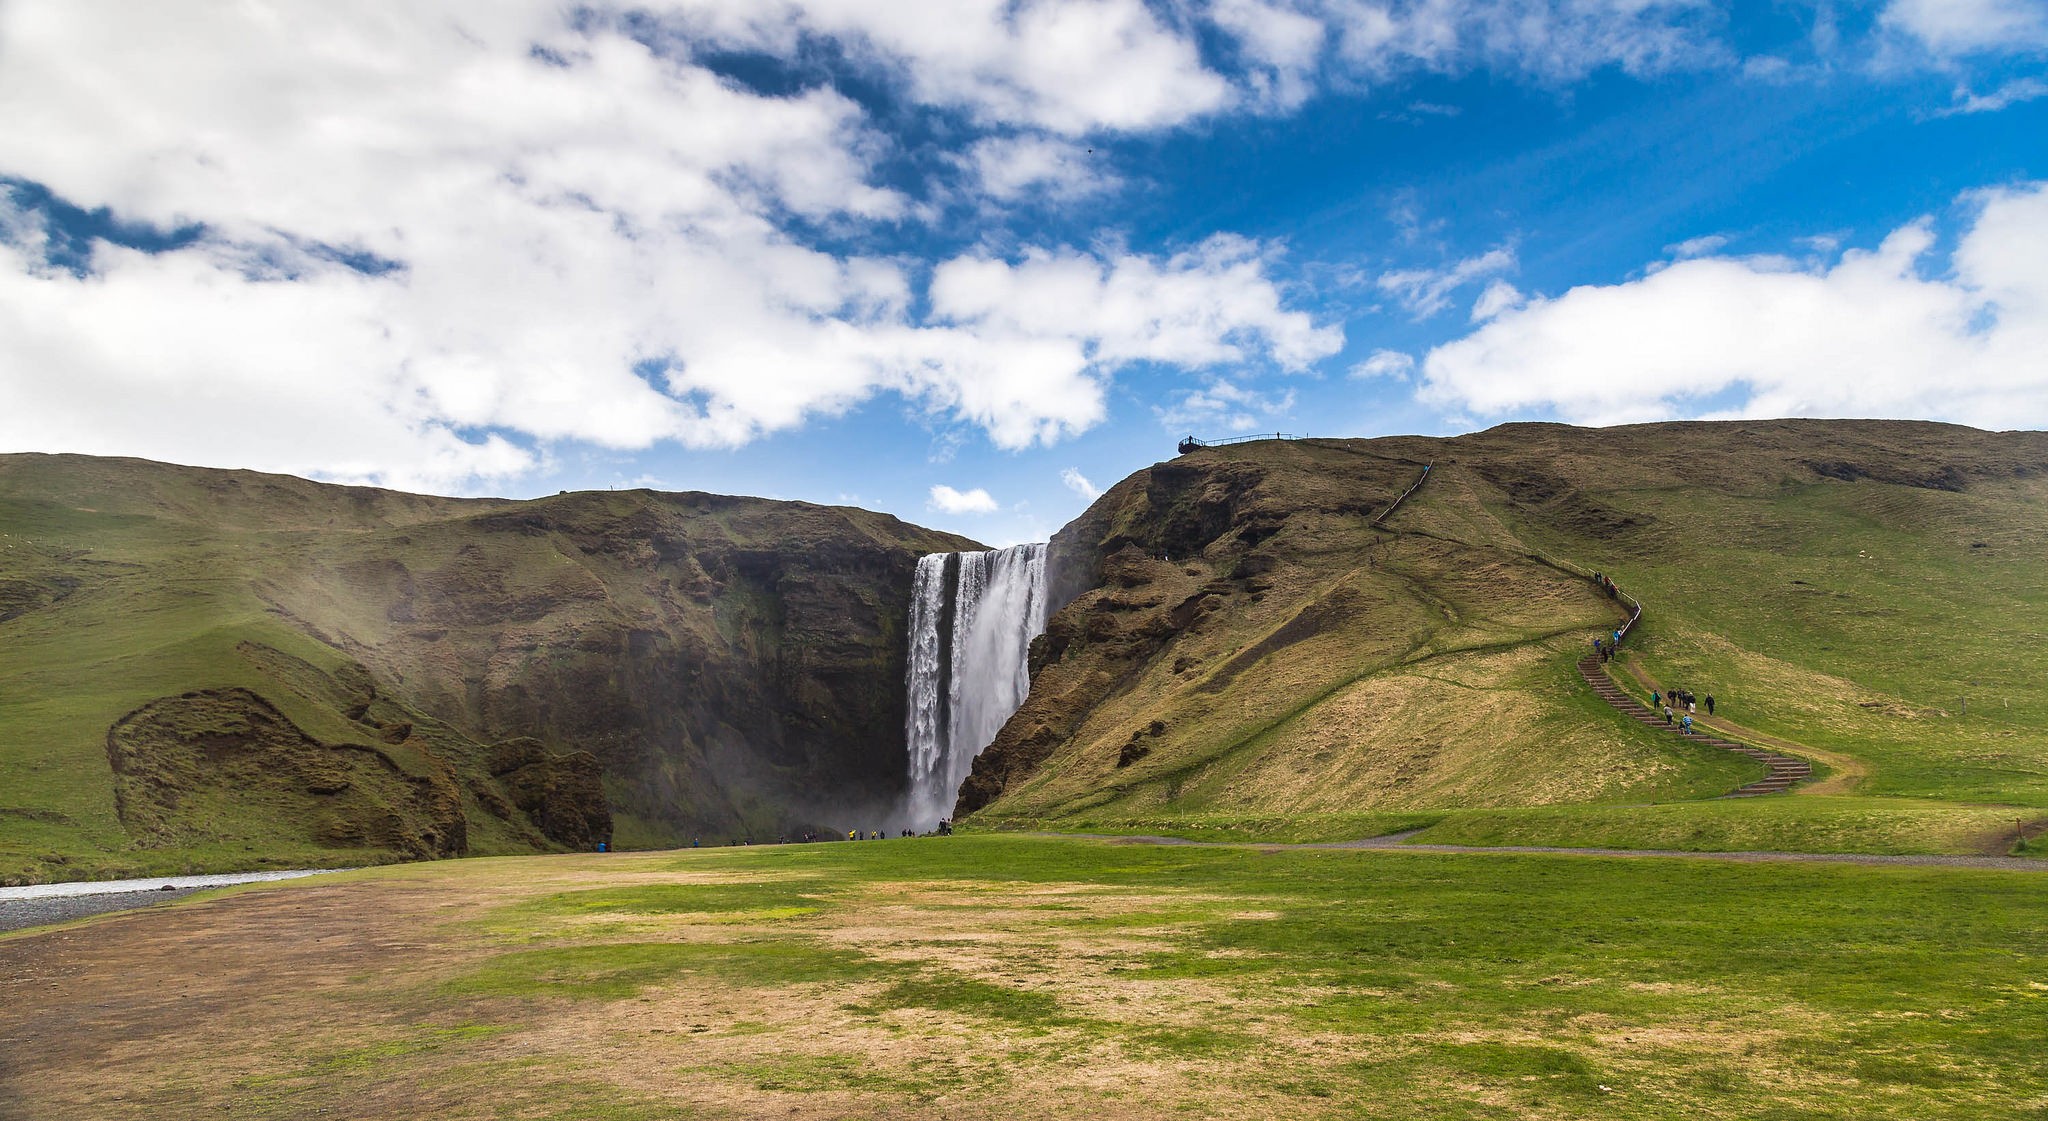 General 2048x1121 waterfall Skogafoss Falls Iceland landscape hills nordic landscapes nature outdoors rocks clouds